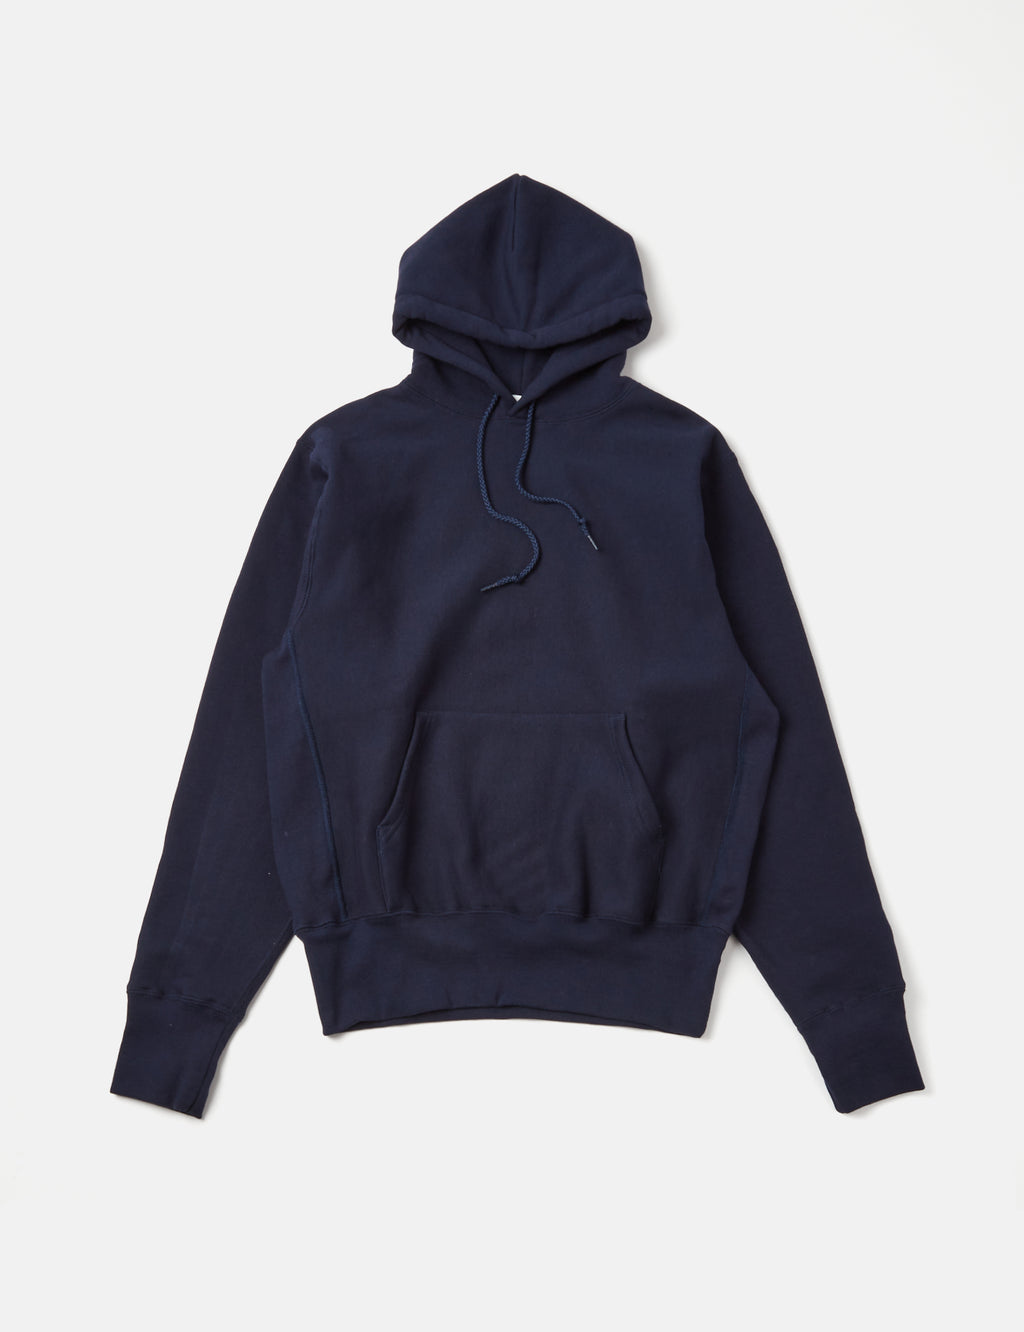 Camber USA 12oz Pullover Hooded Sweatshirt - Navy Blue I Urban Excess ...